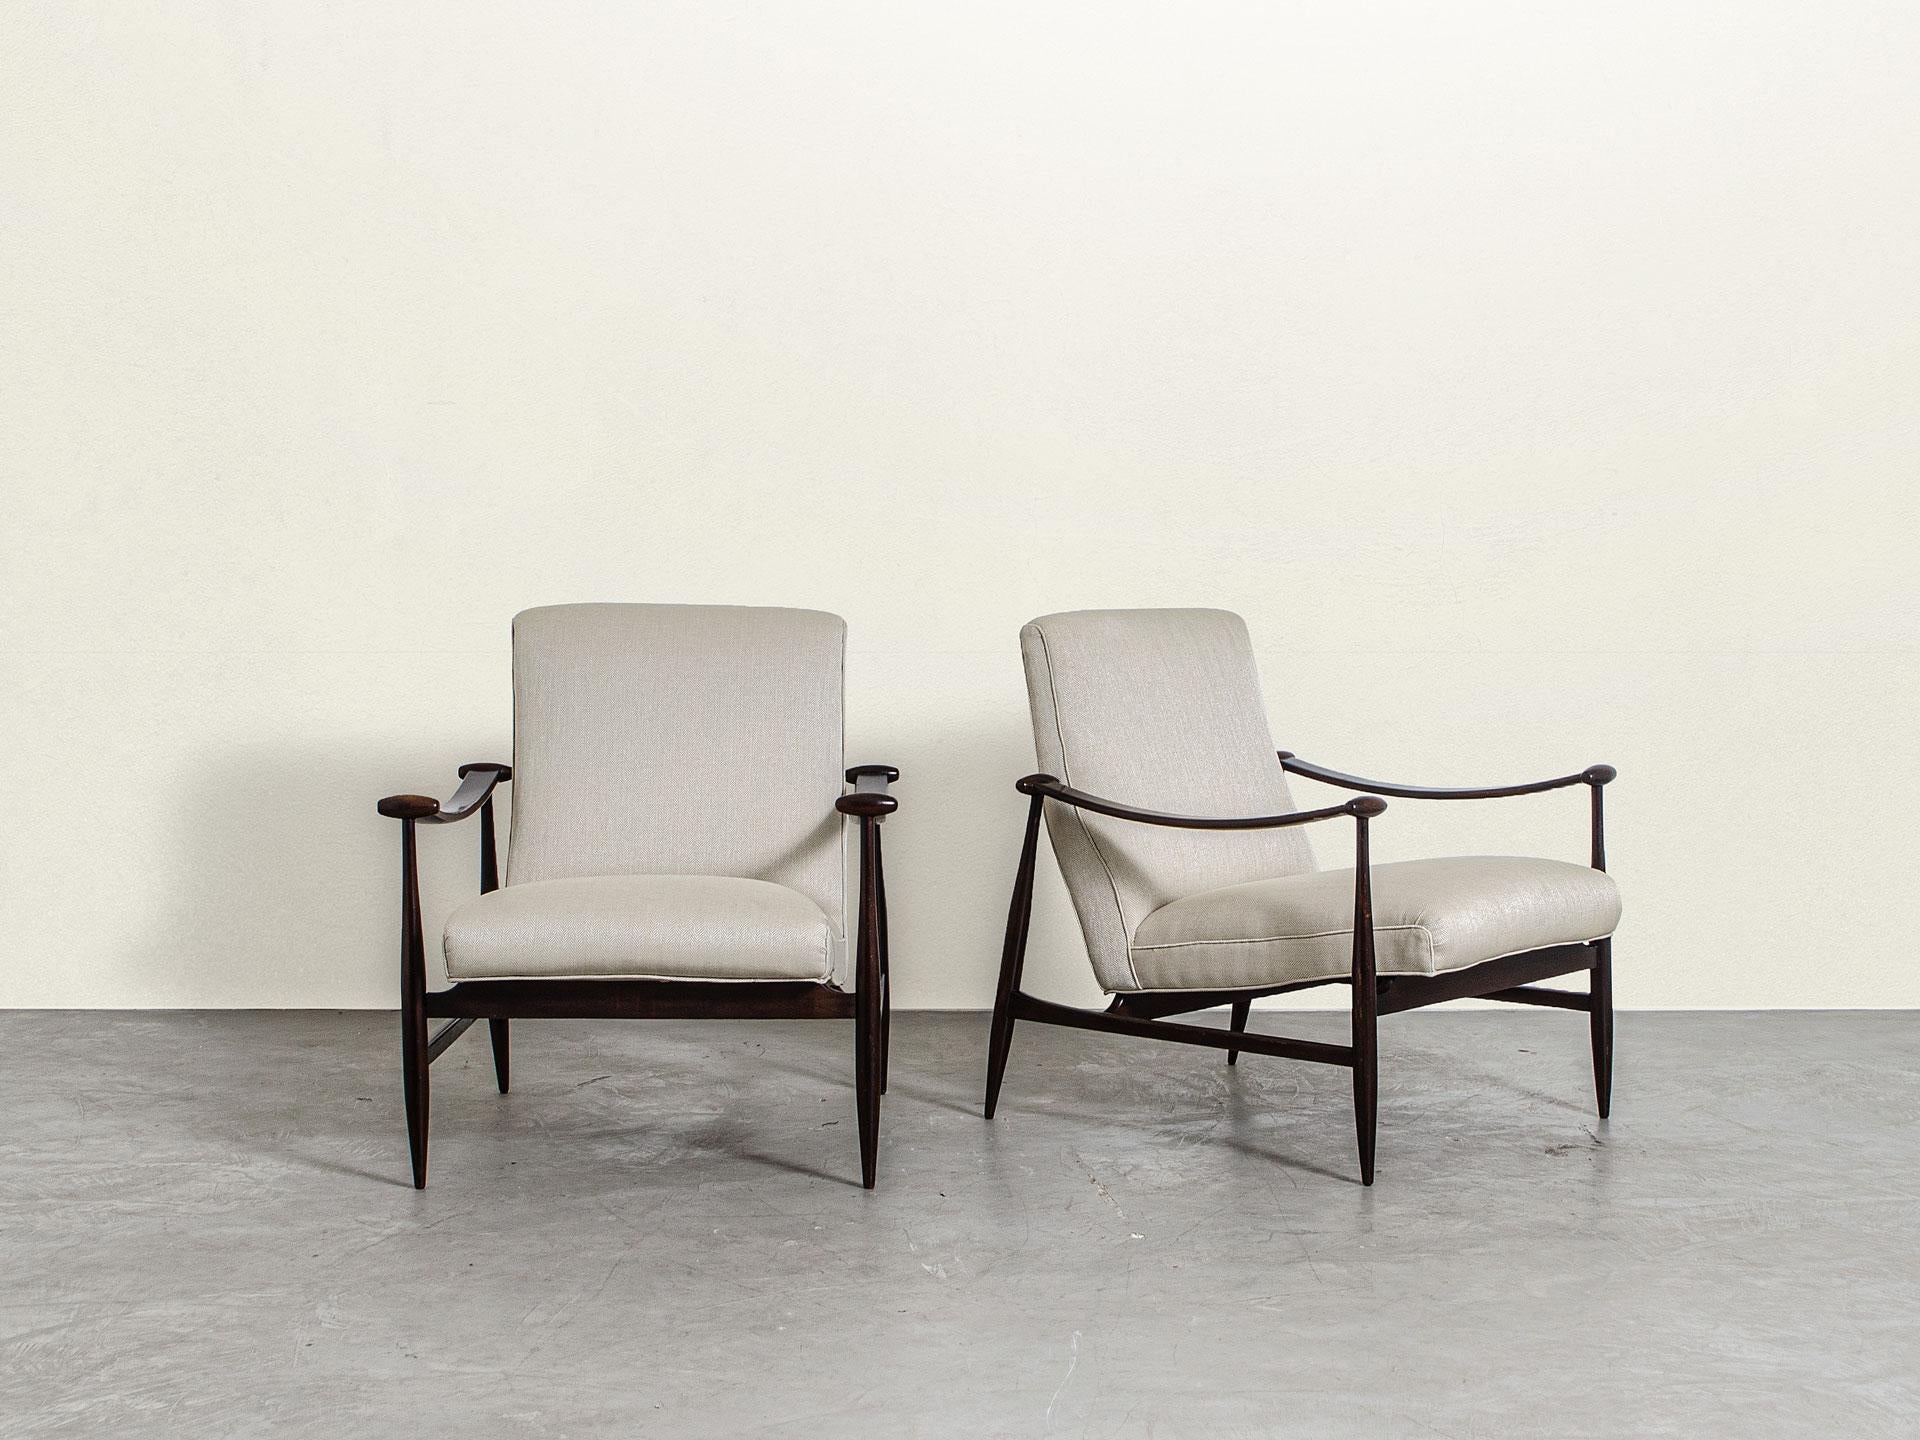 This beautiful pair of armchairs were made of Brazilian hardwood in the 60s by Liceu de Artes & Ofícios. The elegant curved lines of the arms and legs combined with a very comfortable seat and backrest structure result in a unique design. 

The